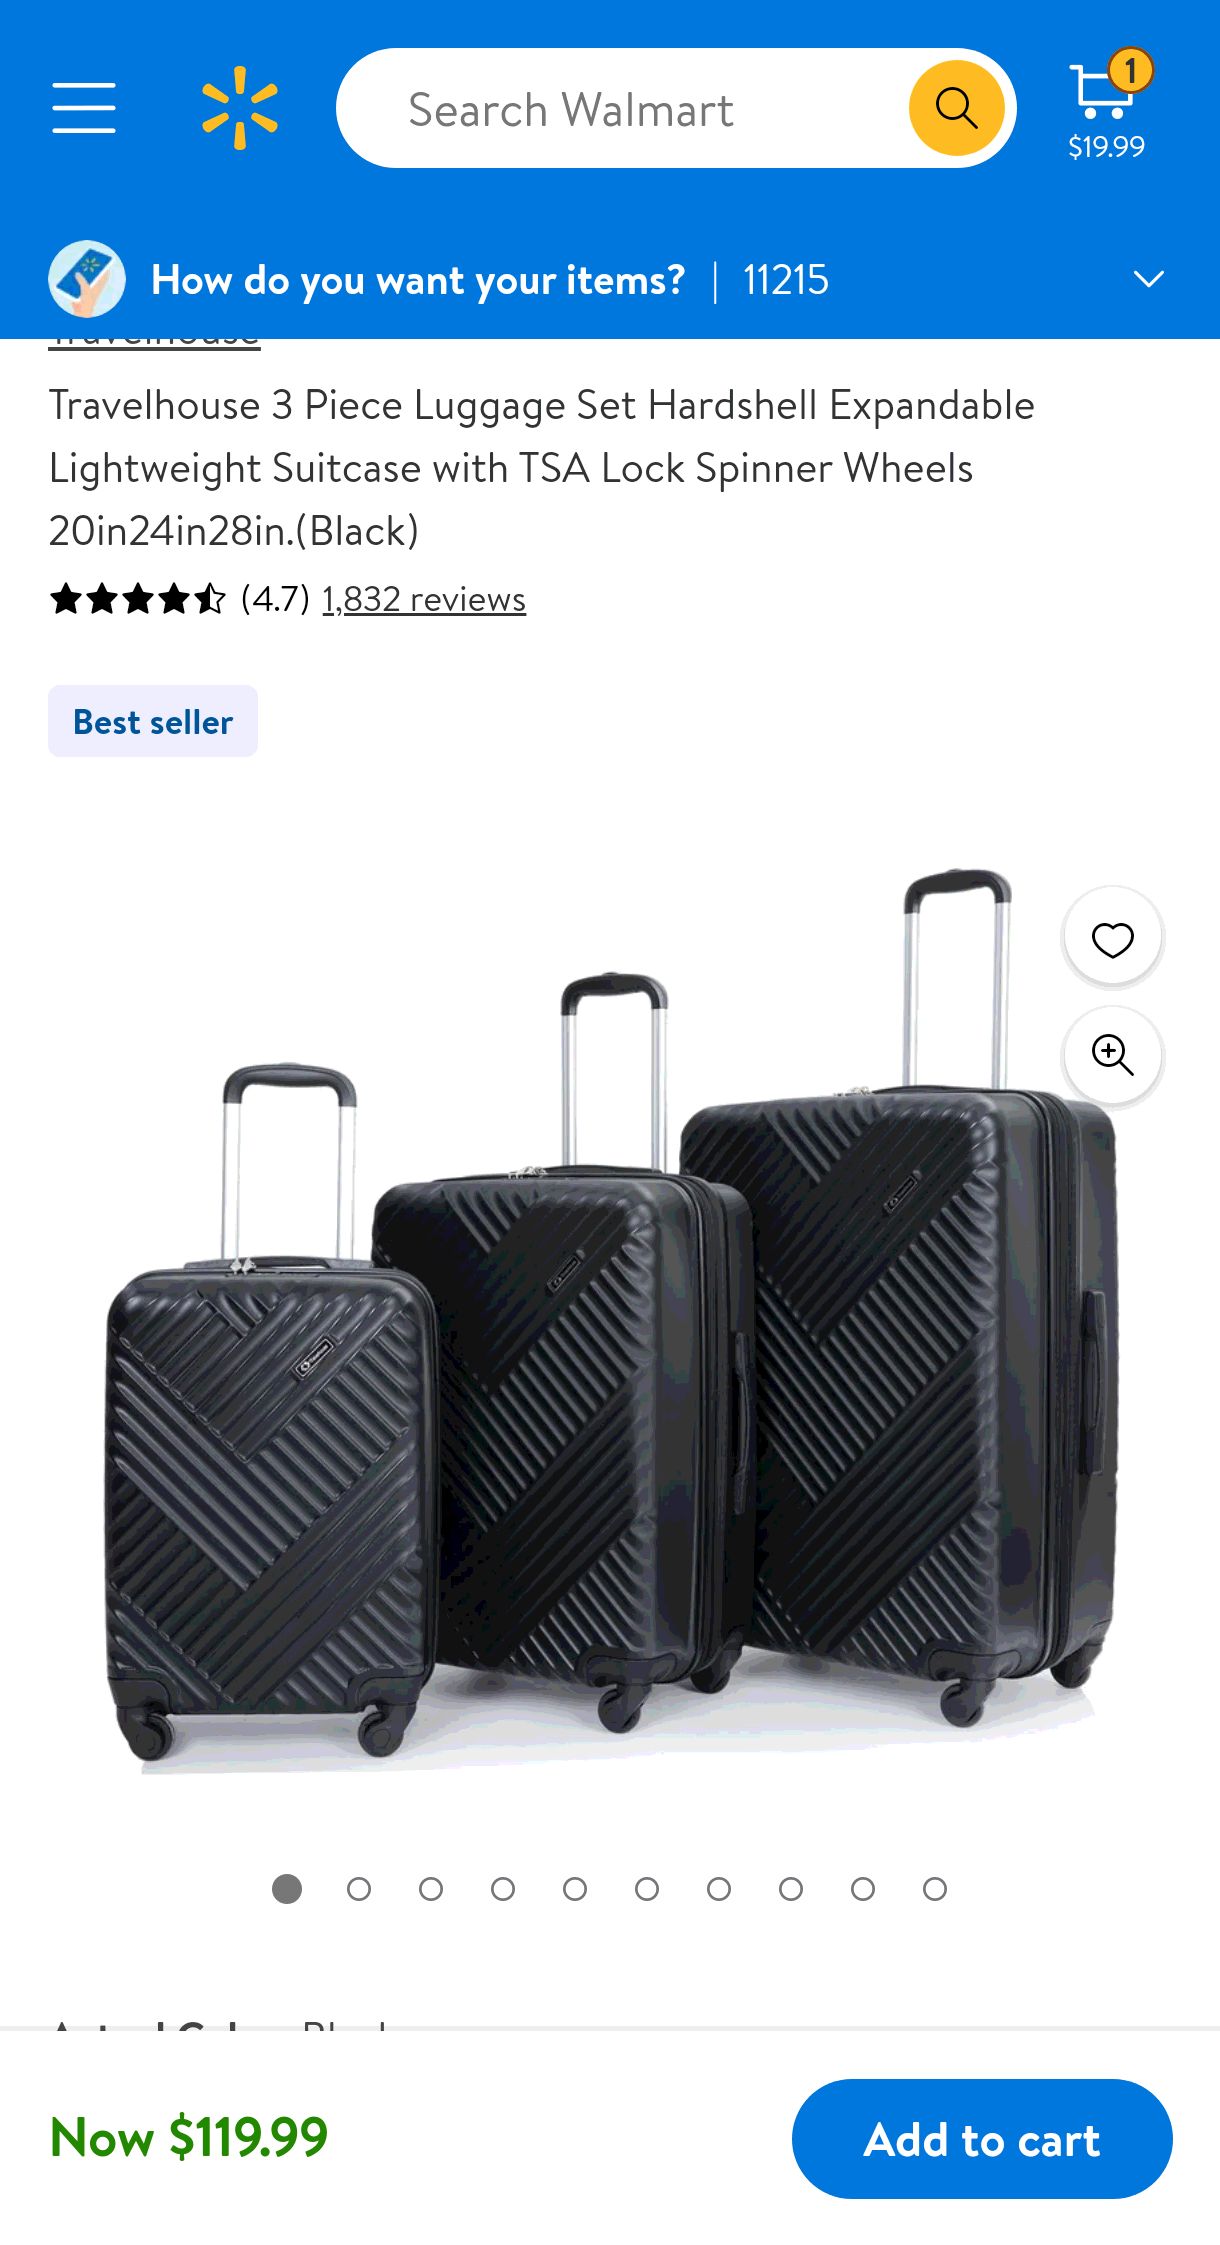 Travelhouse 3 Piece Luggage Set Hardshell Expandable Lightweight Suitcase with TSA Lock Spinner Wheels 20in24in28in.(Black) - Walmart.com